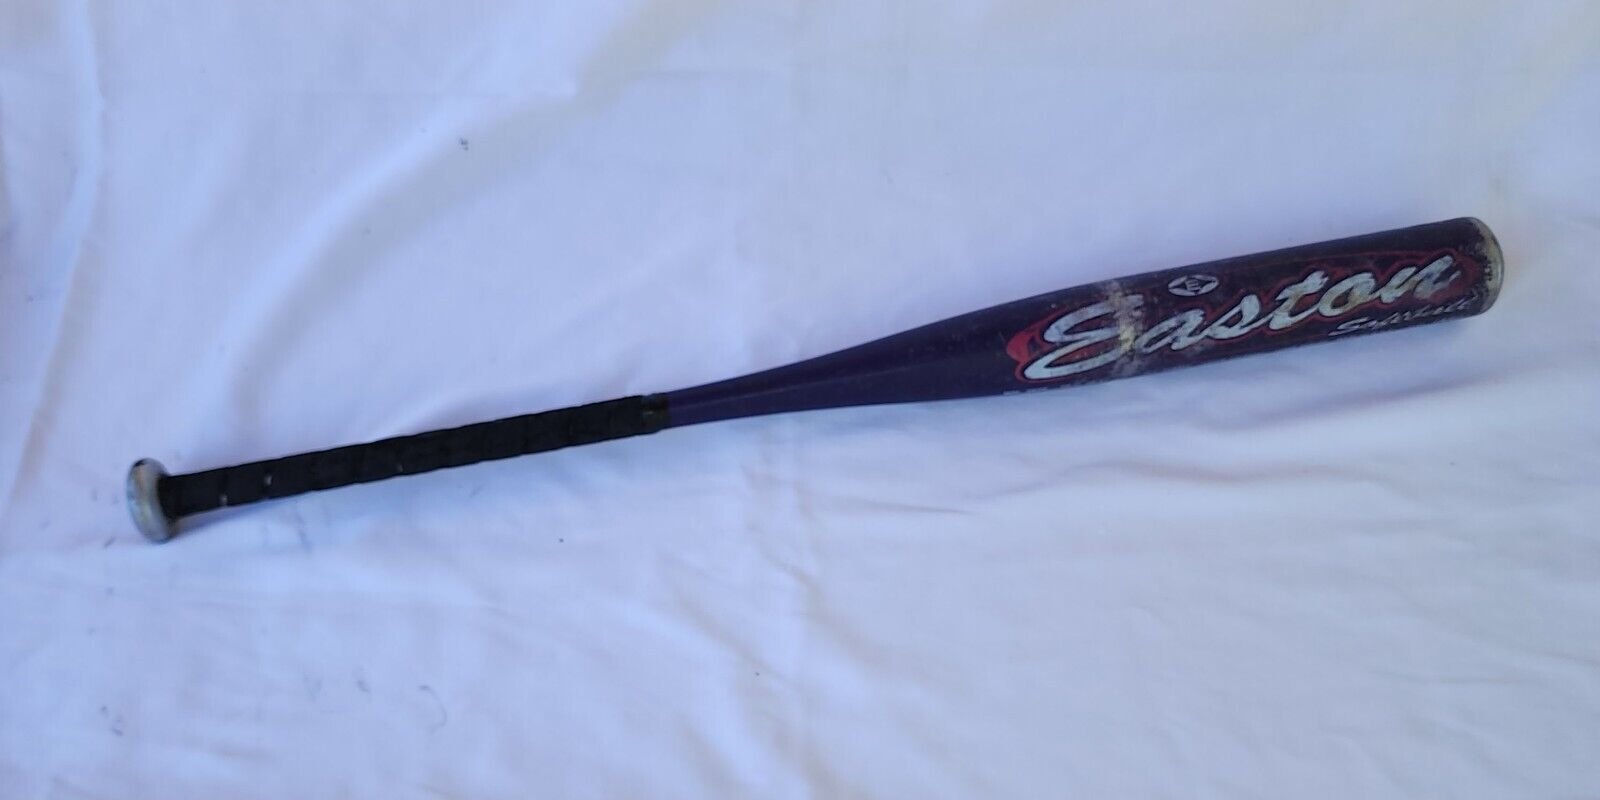 Primary image for Easton FastPitch Softball Bat SK20 30" 20oz 2-1/4" Barrel Youth or Adult Purple